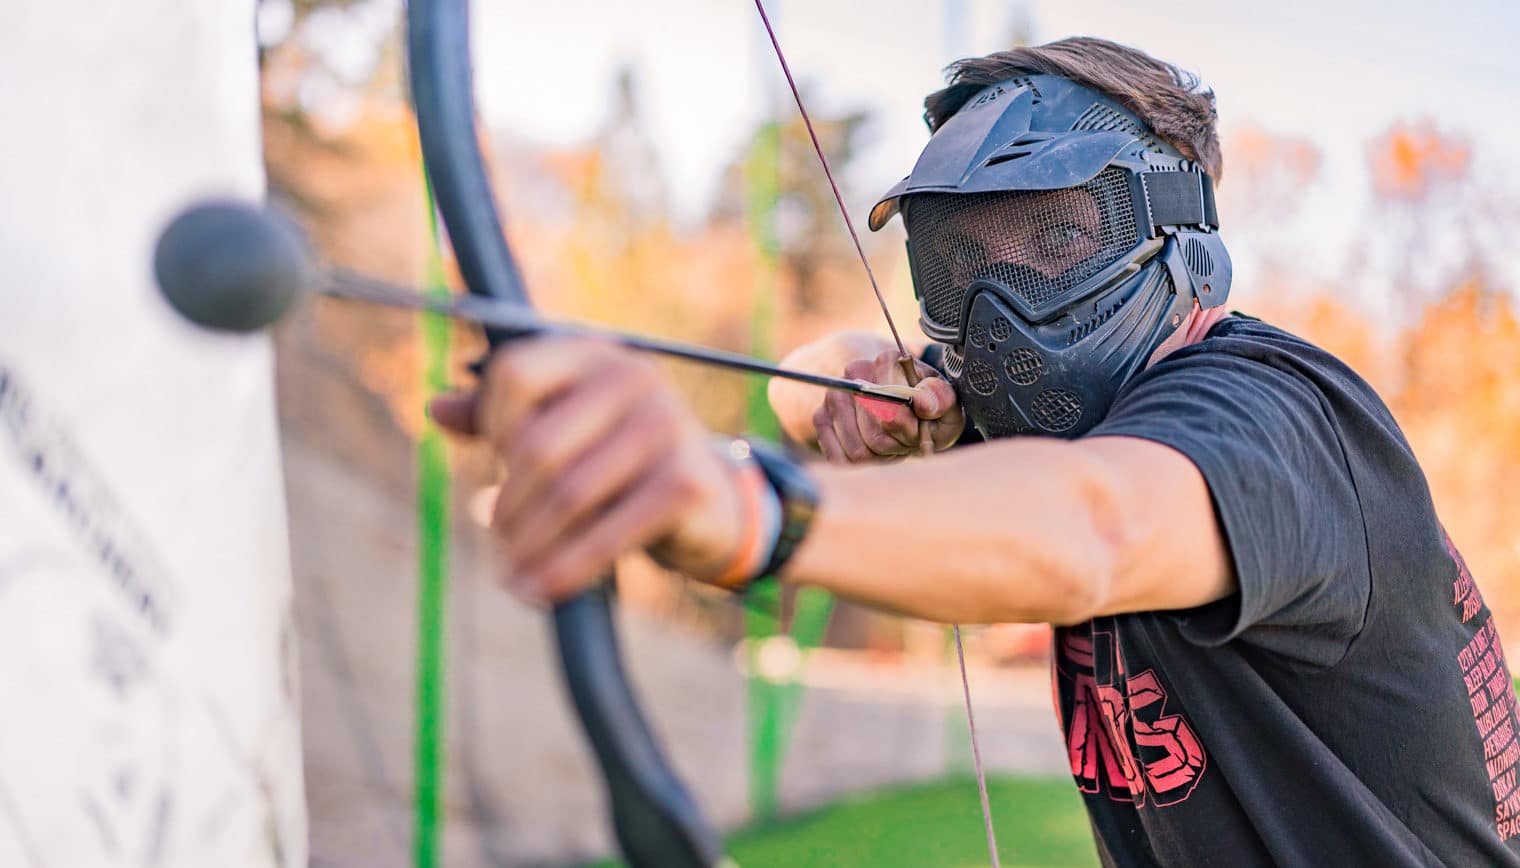 A man in archery tag gear, aiming a bow and arrow.